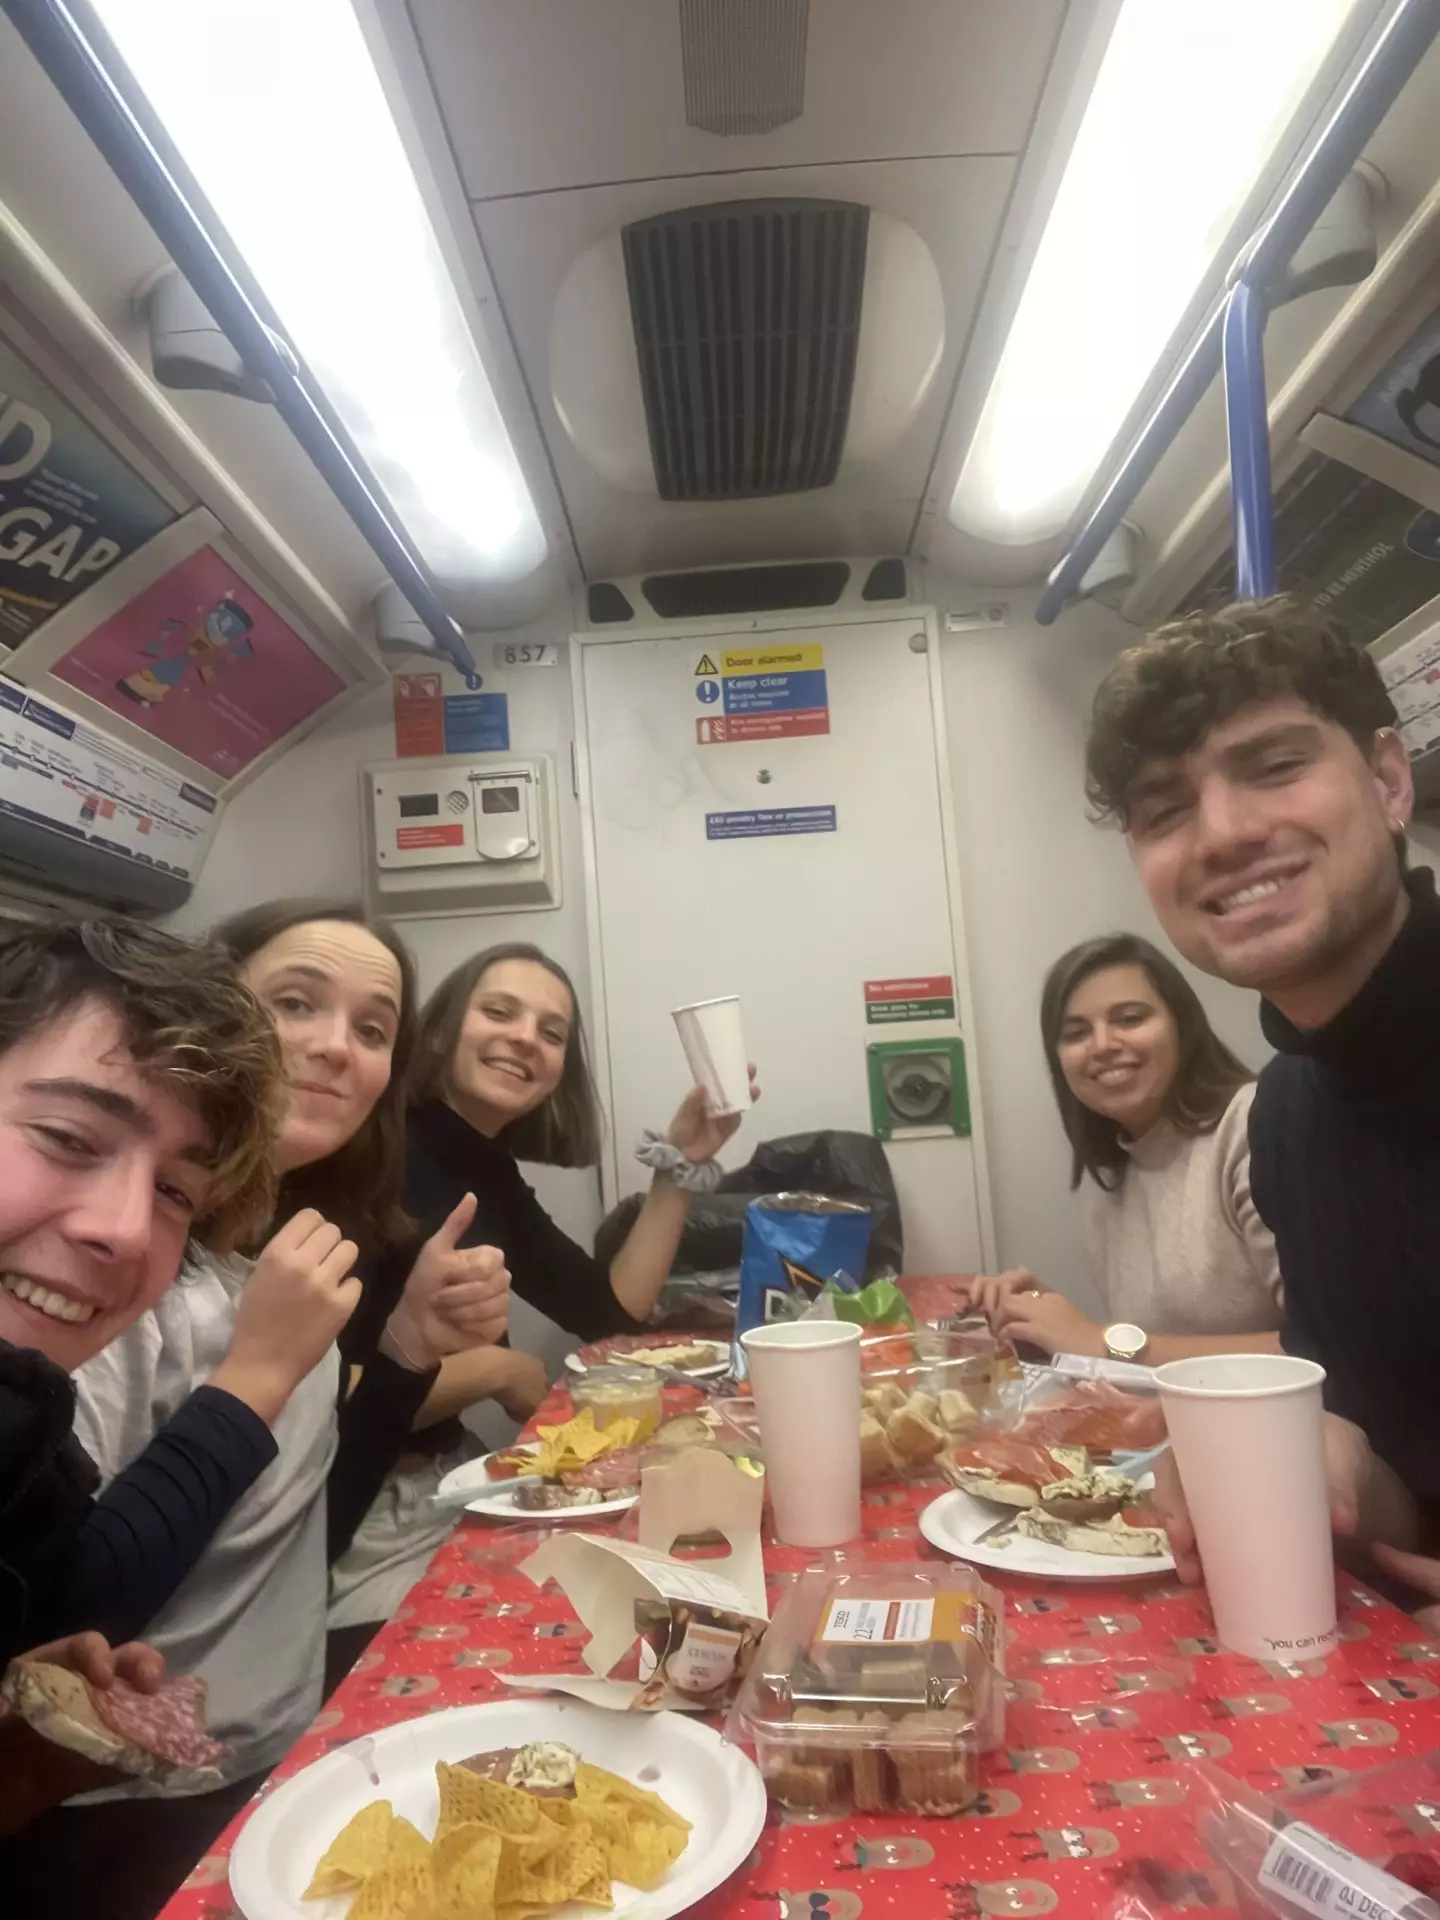 A group of students celebrated Christmas by taking their own dinner and dining table on the London tube.